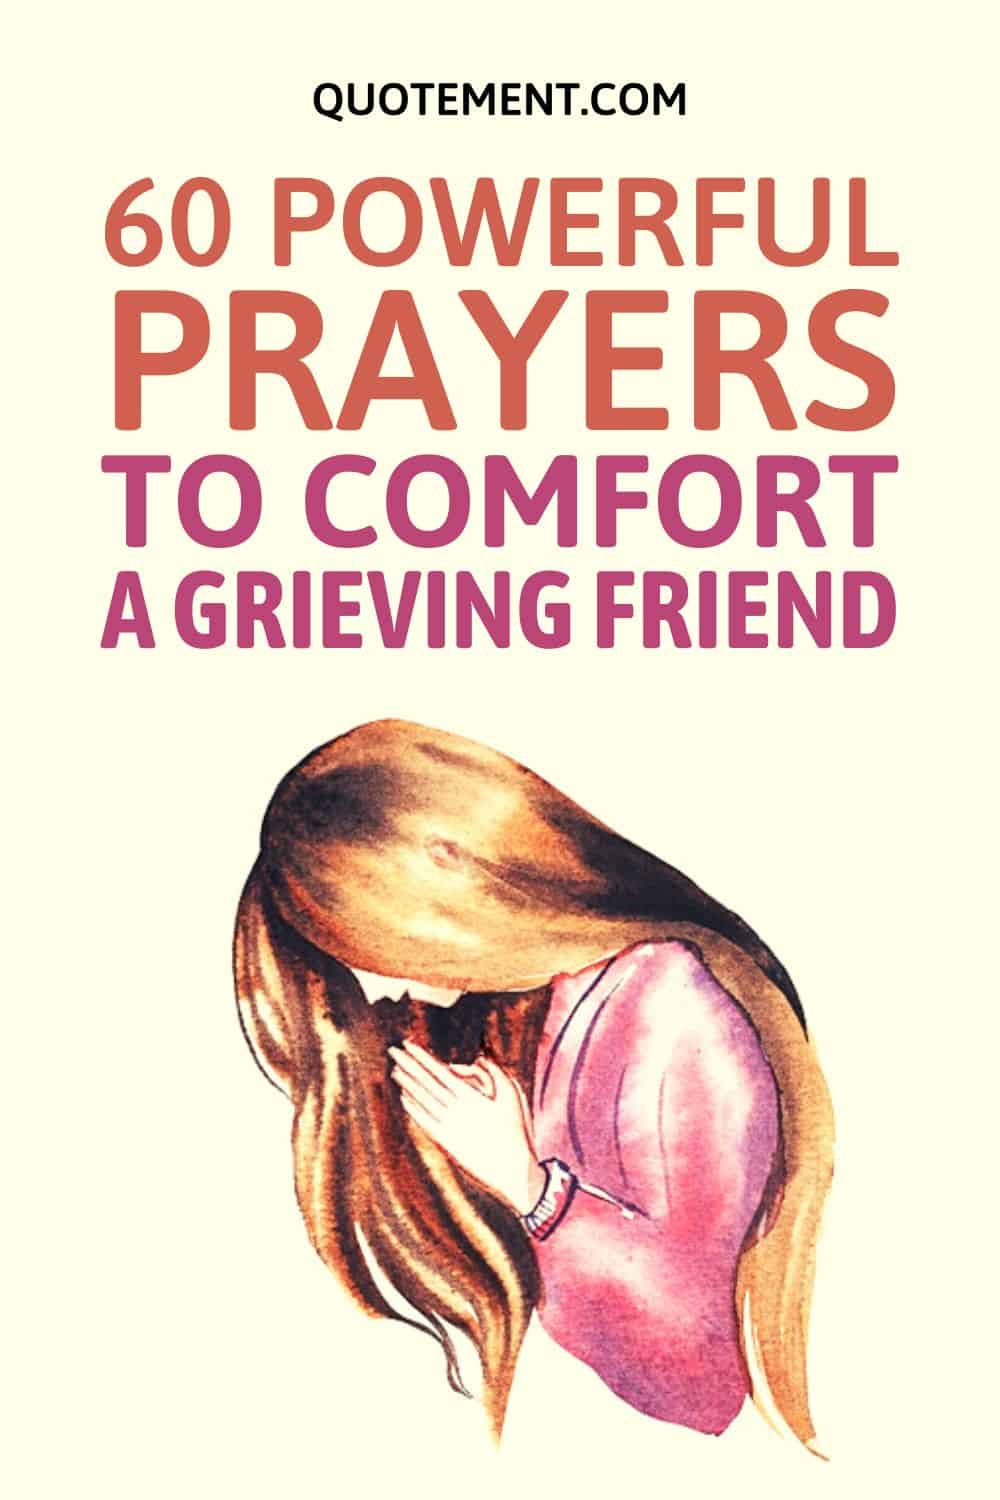 List Of 60 Powerful Prayers To Comfort A Grieving Friend
